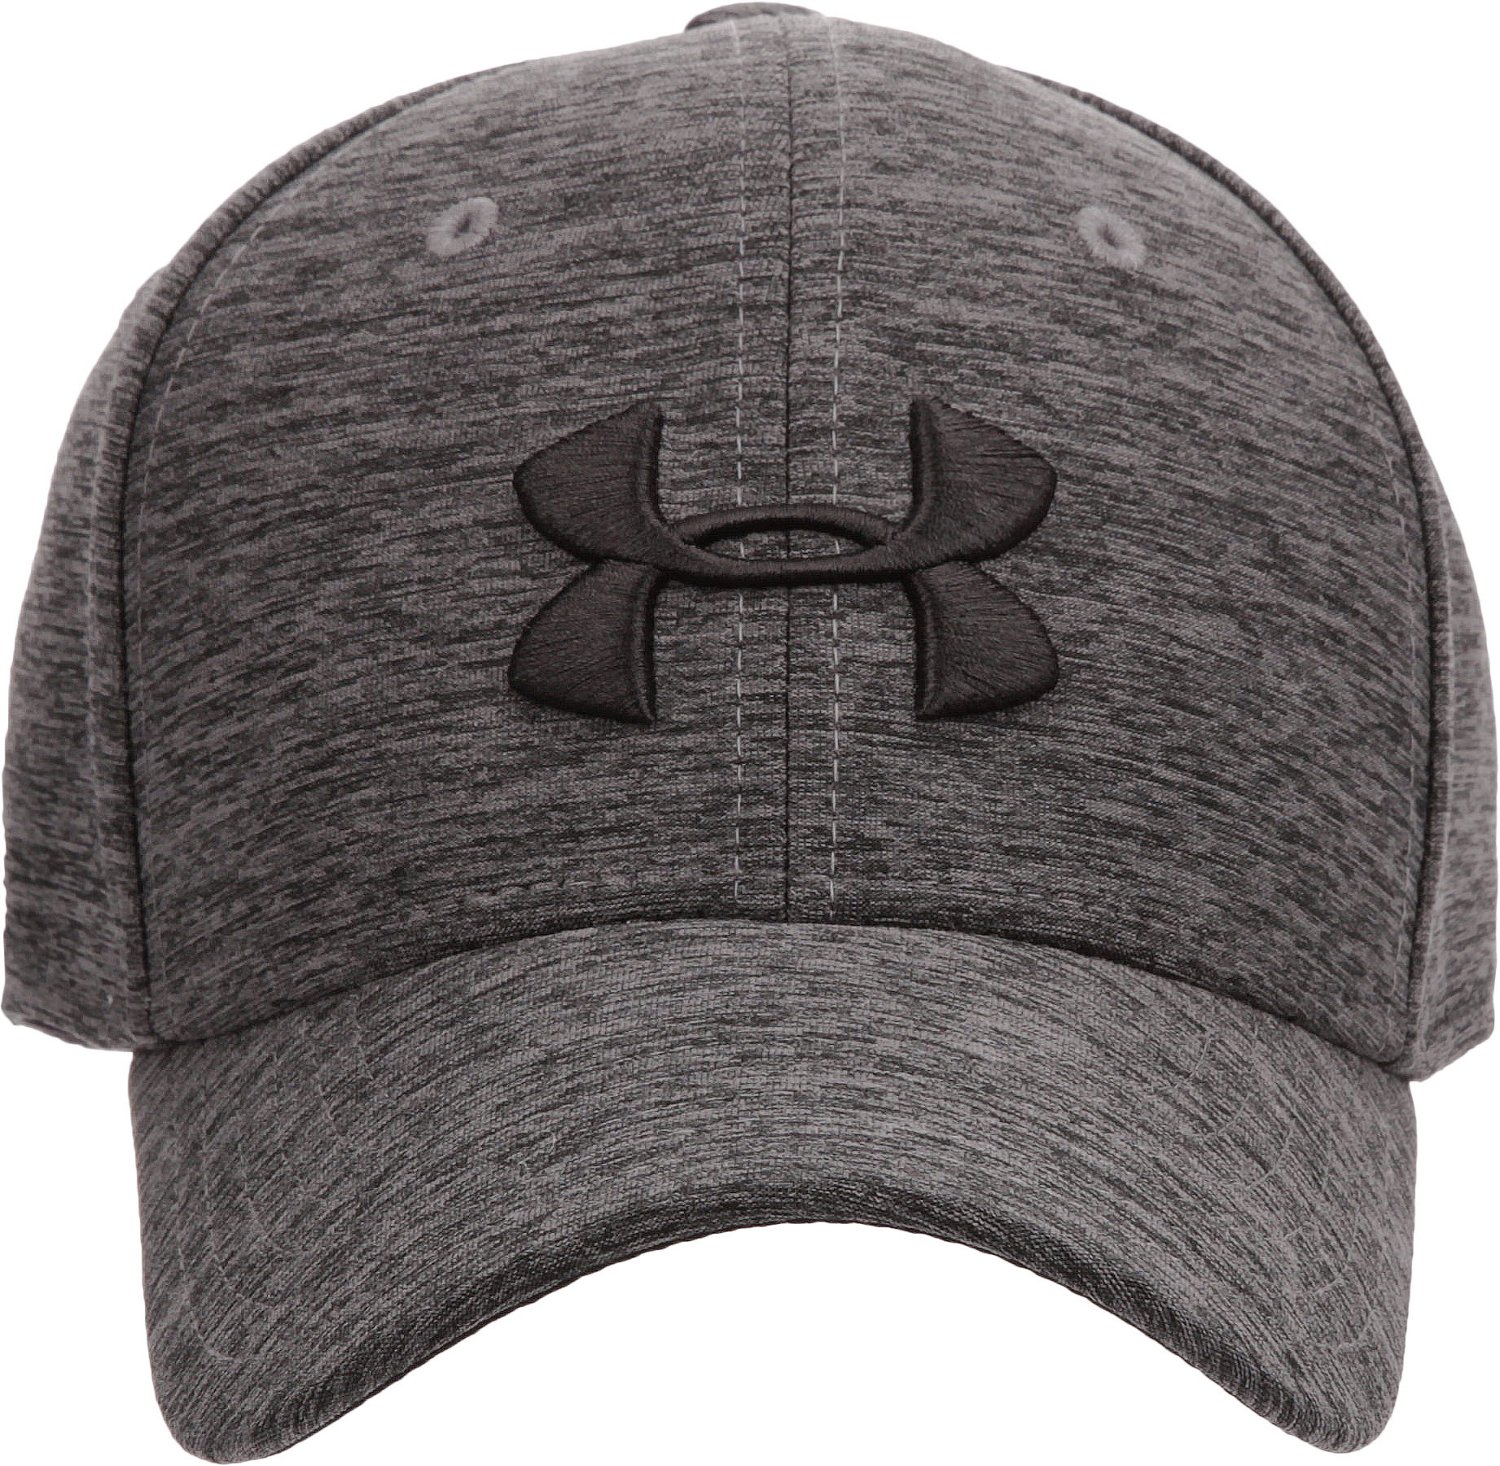 Cheap boys under armour hat Buy Online 